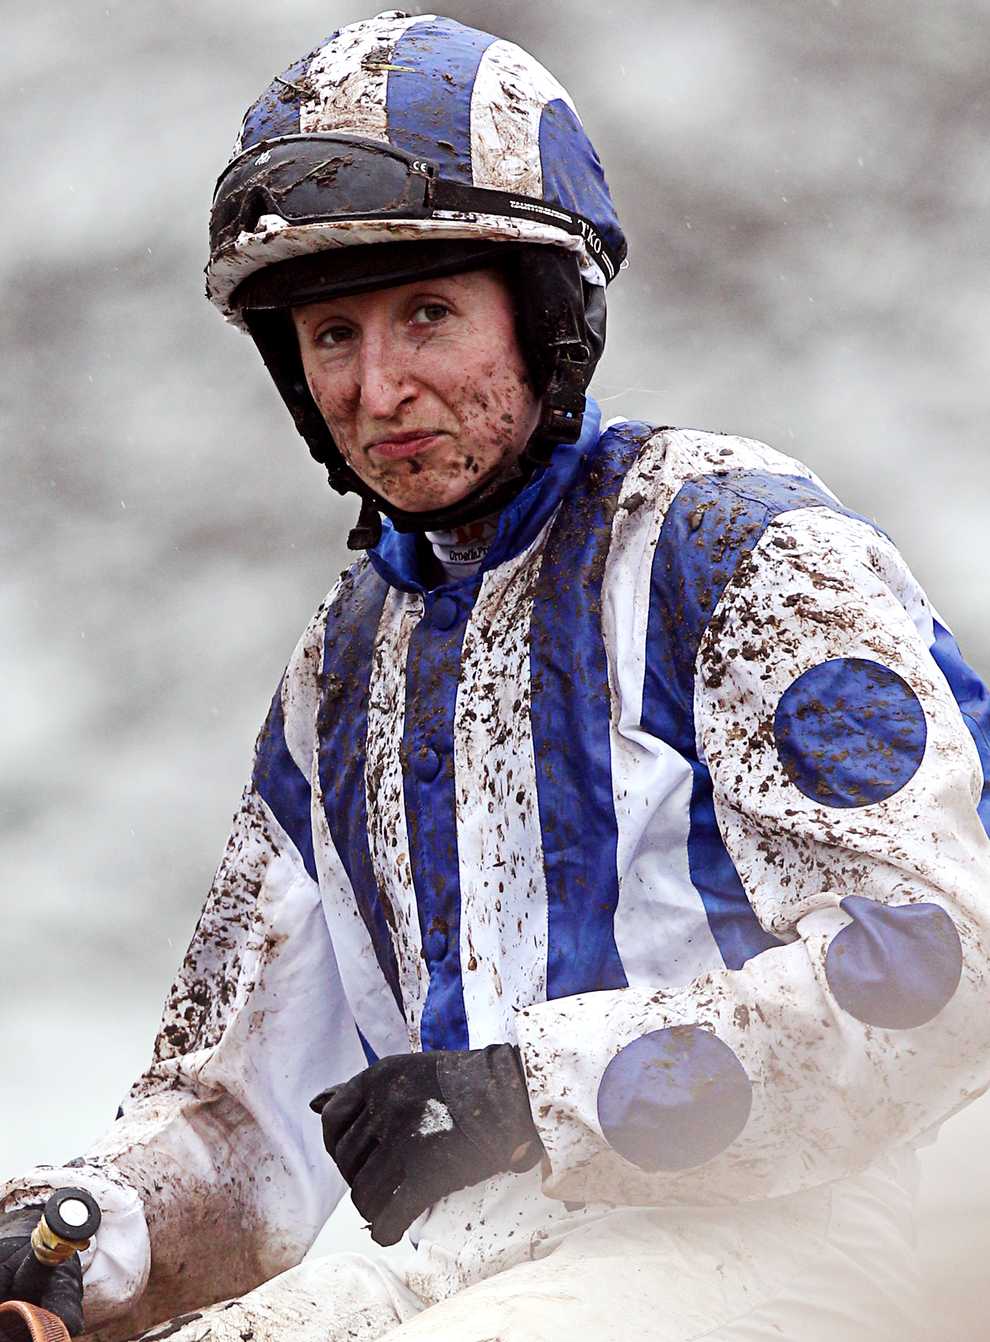 Qualified jockey-coach Sally Randell has been teaching staff at Fergal O'Brien's stable